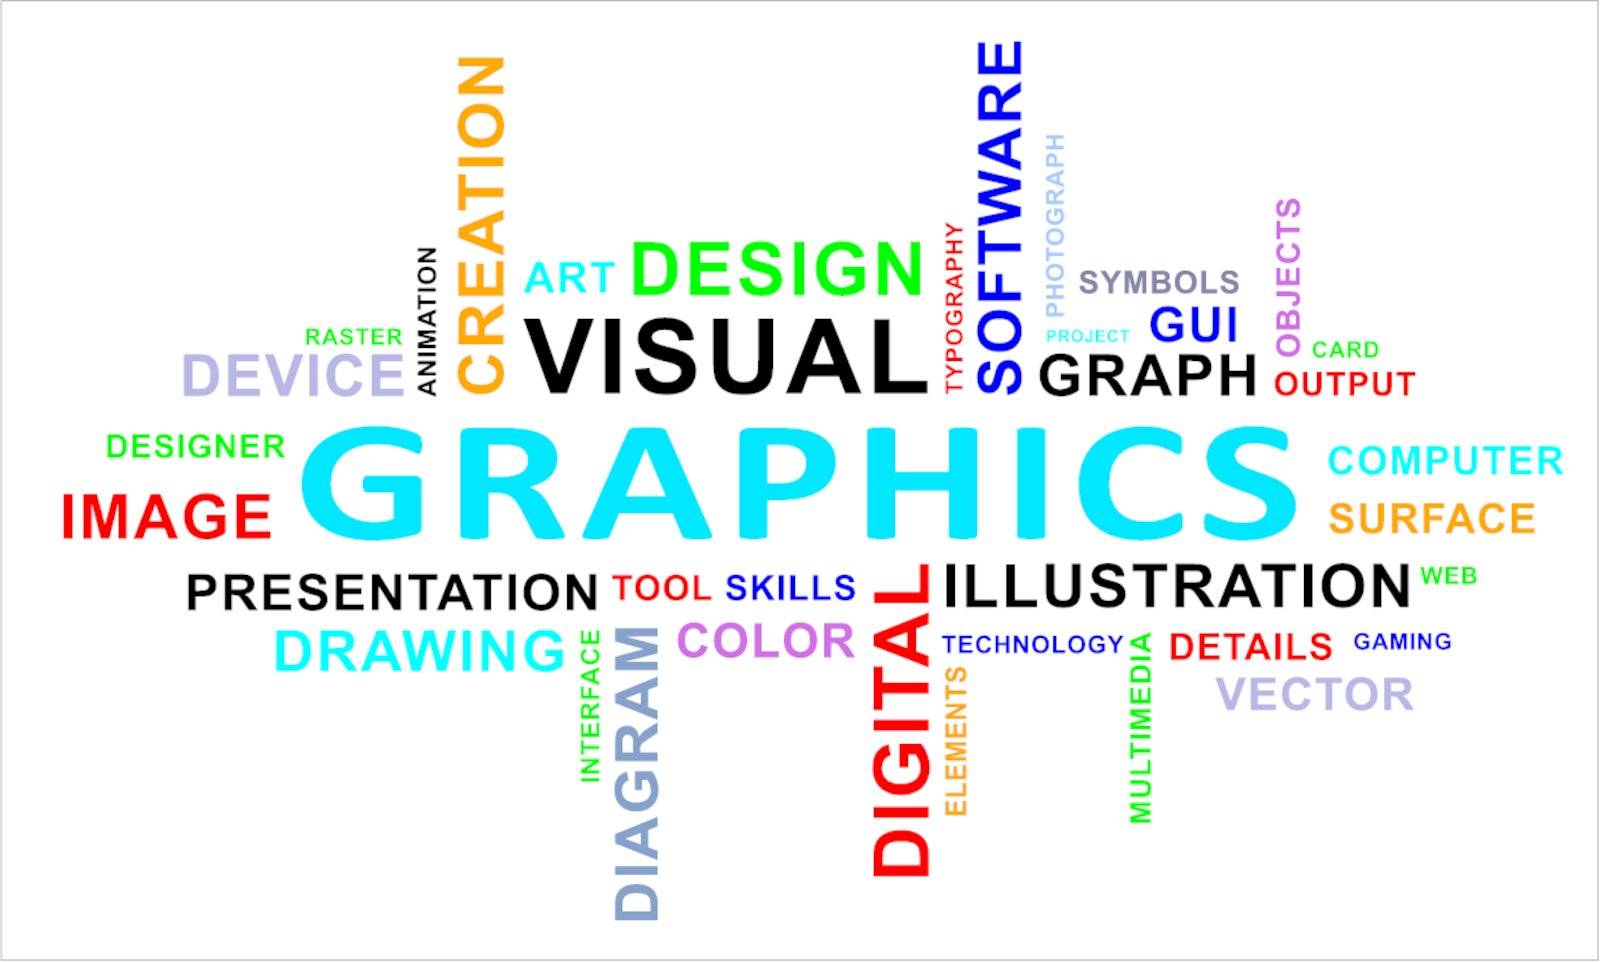 A word cloud of graphics related items